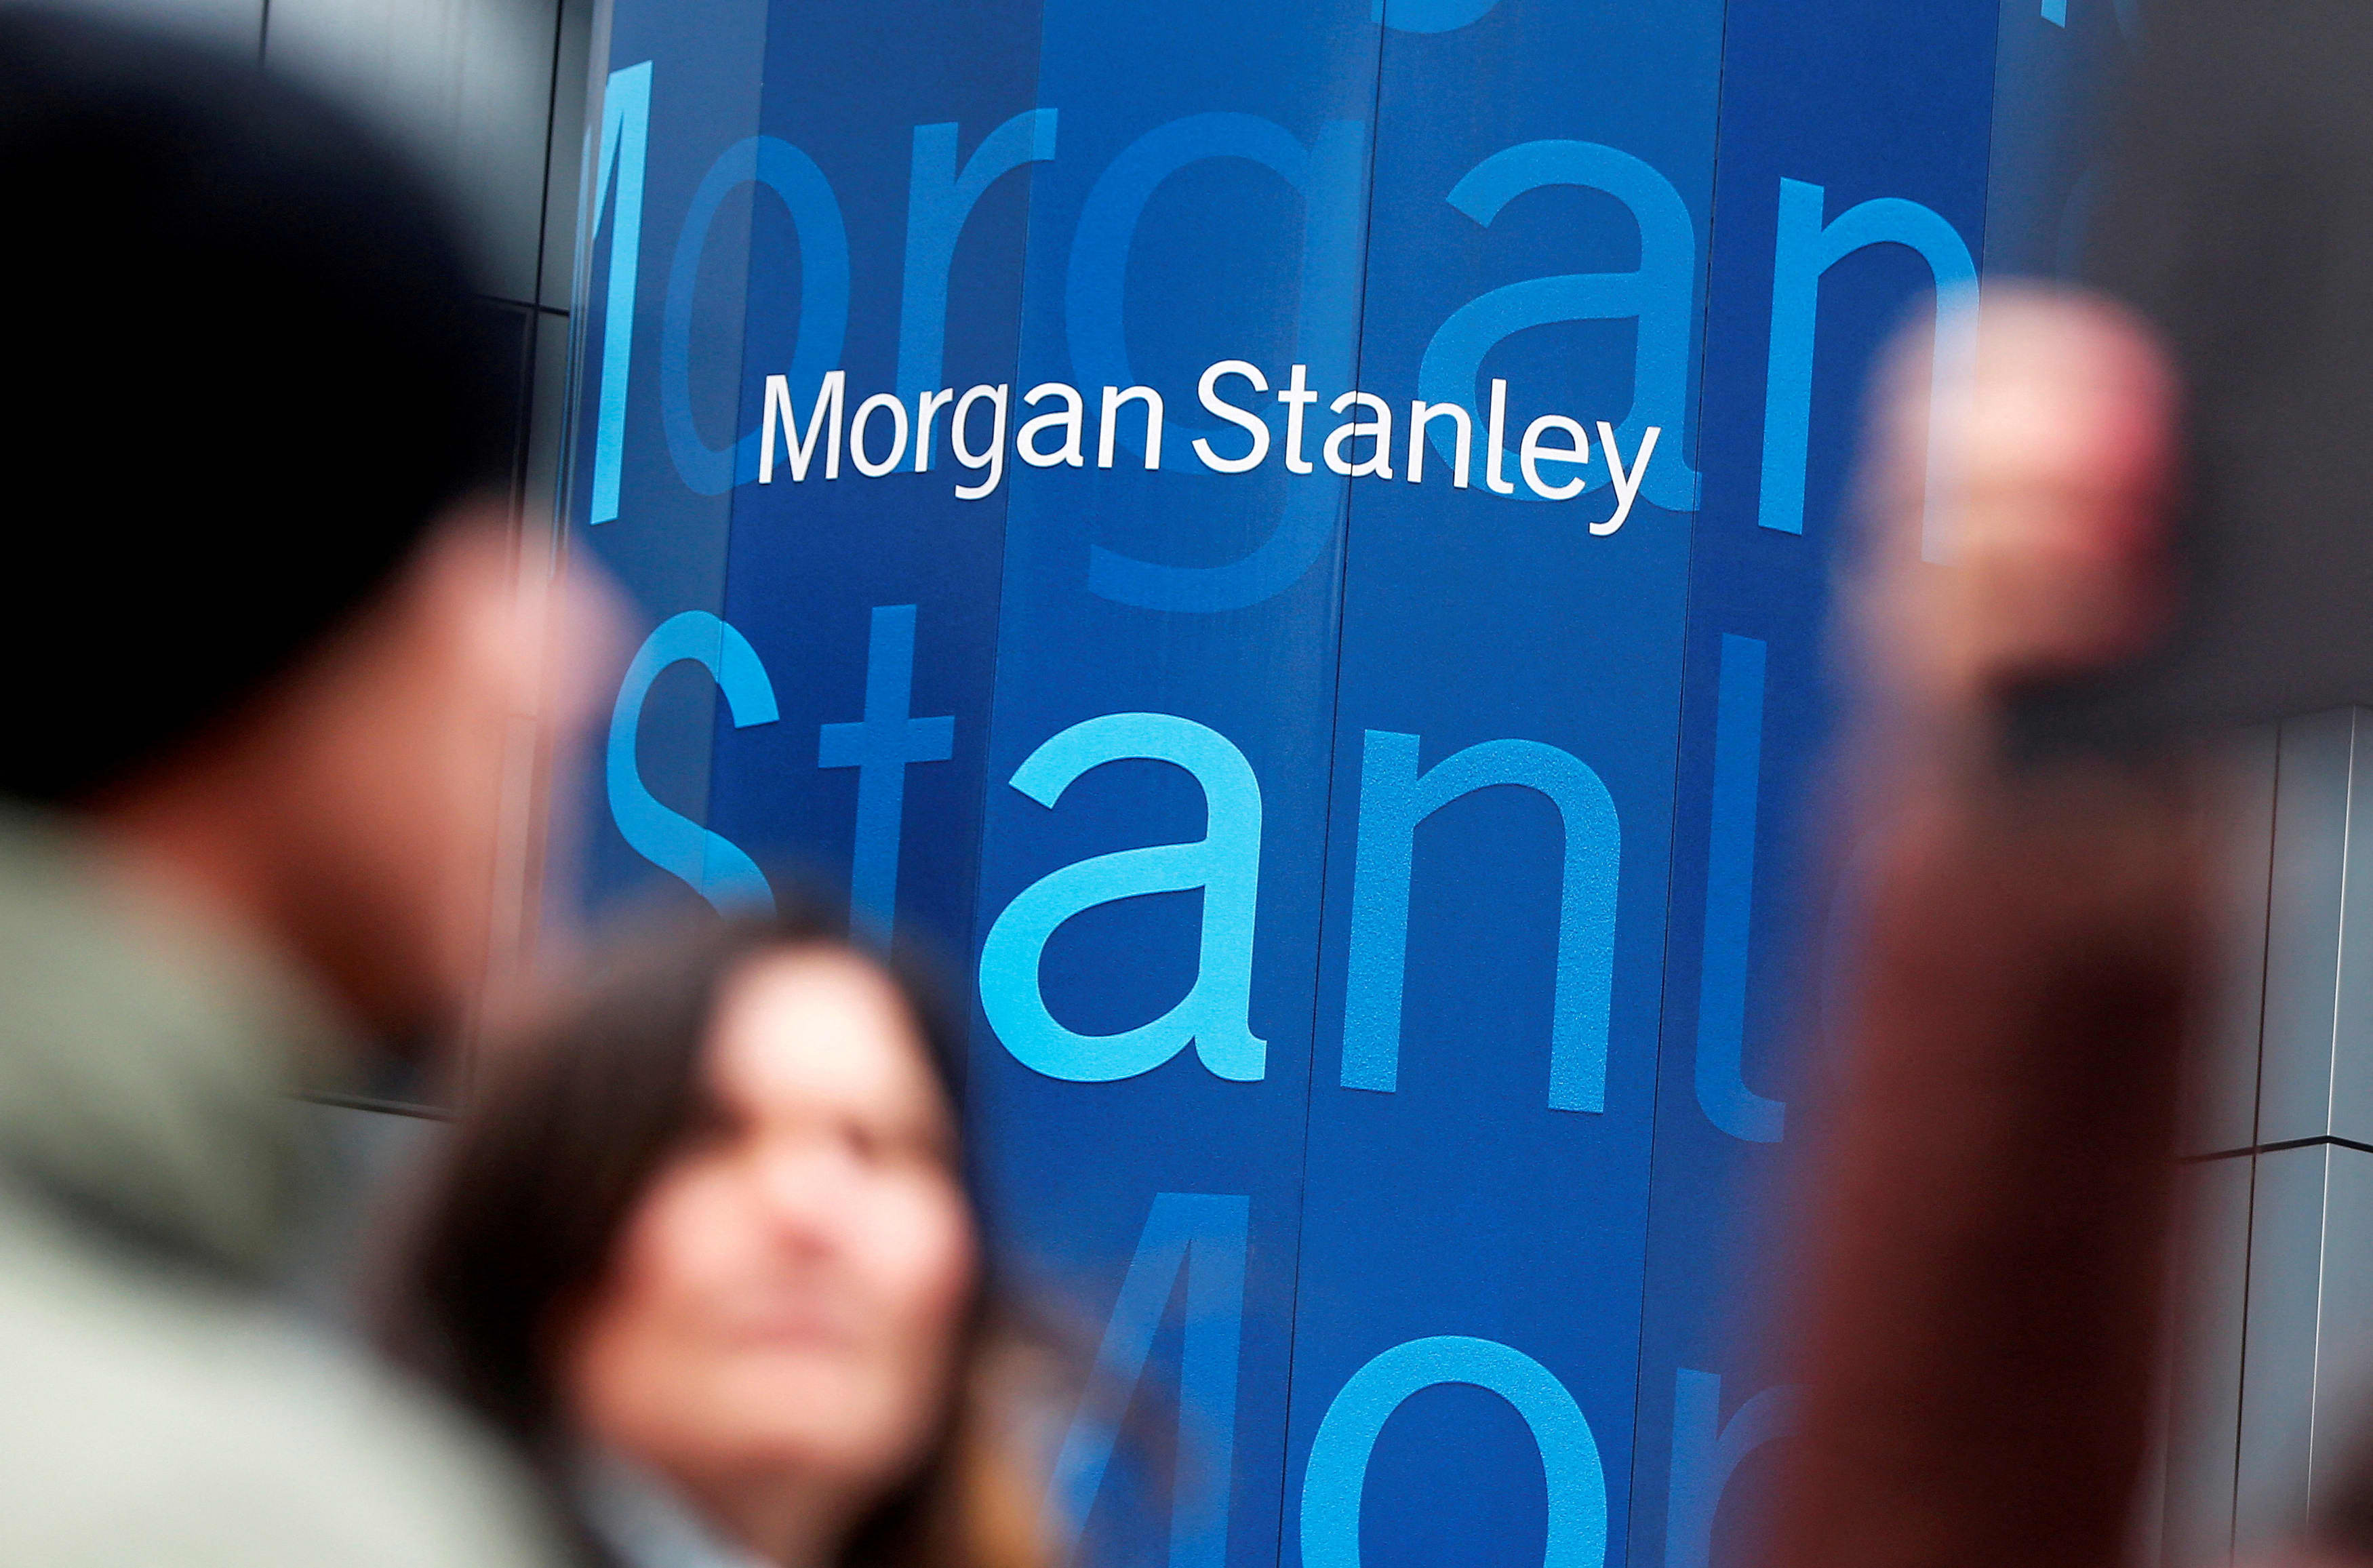 Morgan Stanley has a ‘simple’ tech playbook, names TSMC and others as stocks to buy right now